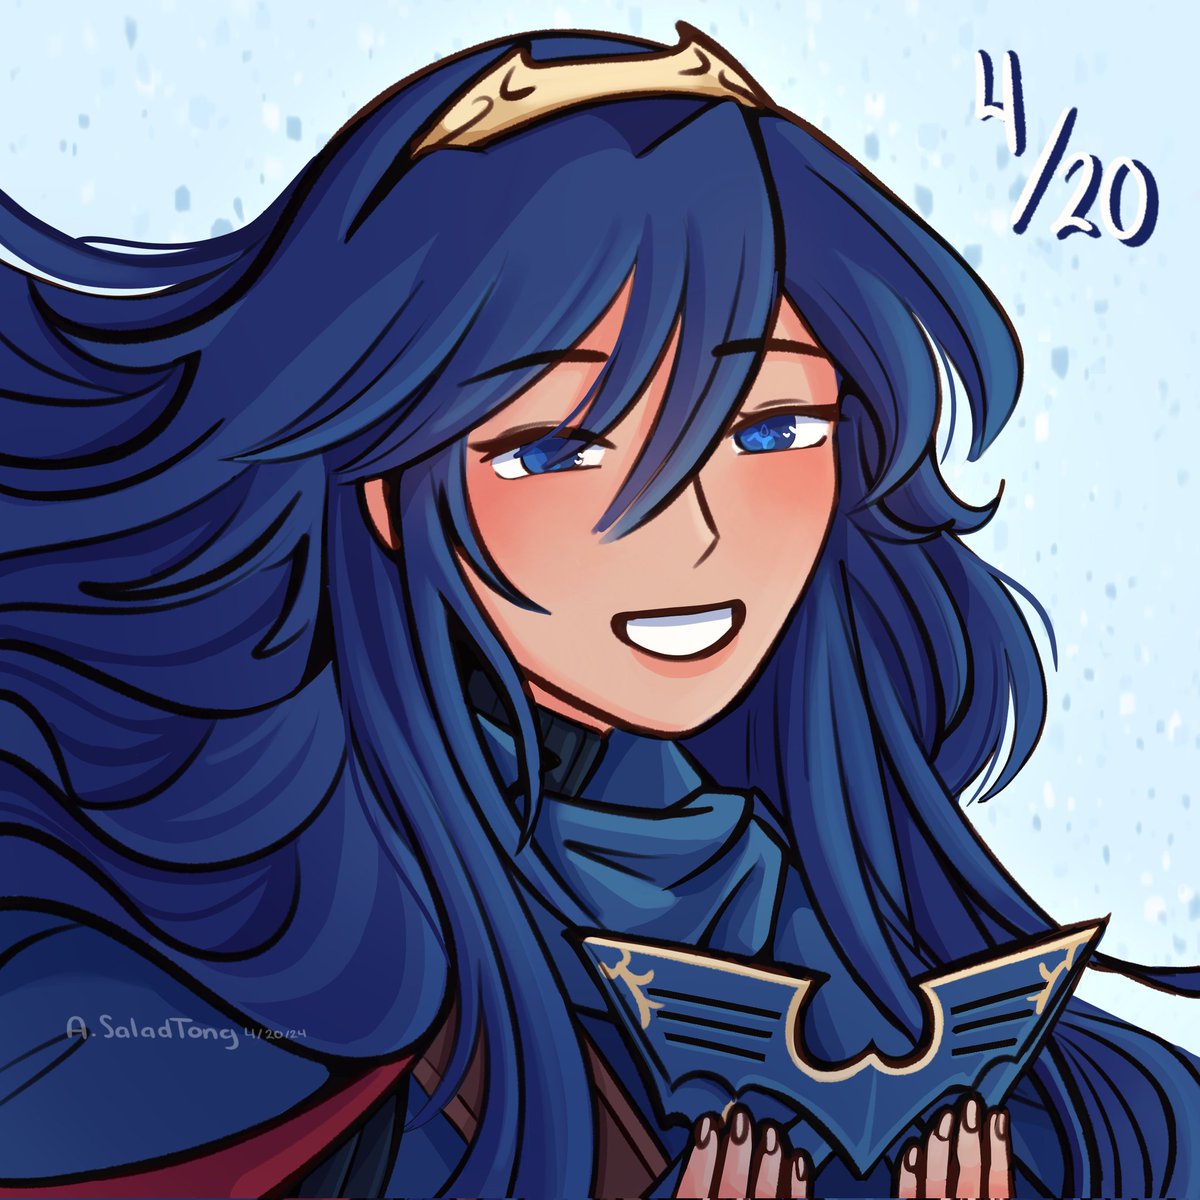 Happy 12th anniversary to Fire Emblem Awakening and happy birthday to Lucina!!! 
#feawakening #feh #fireemblem #feheroes